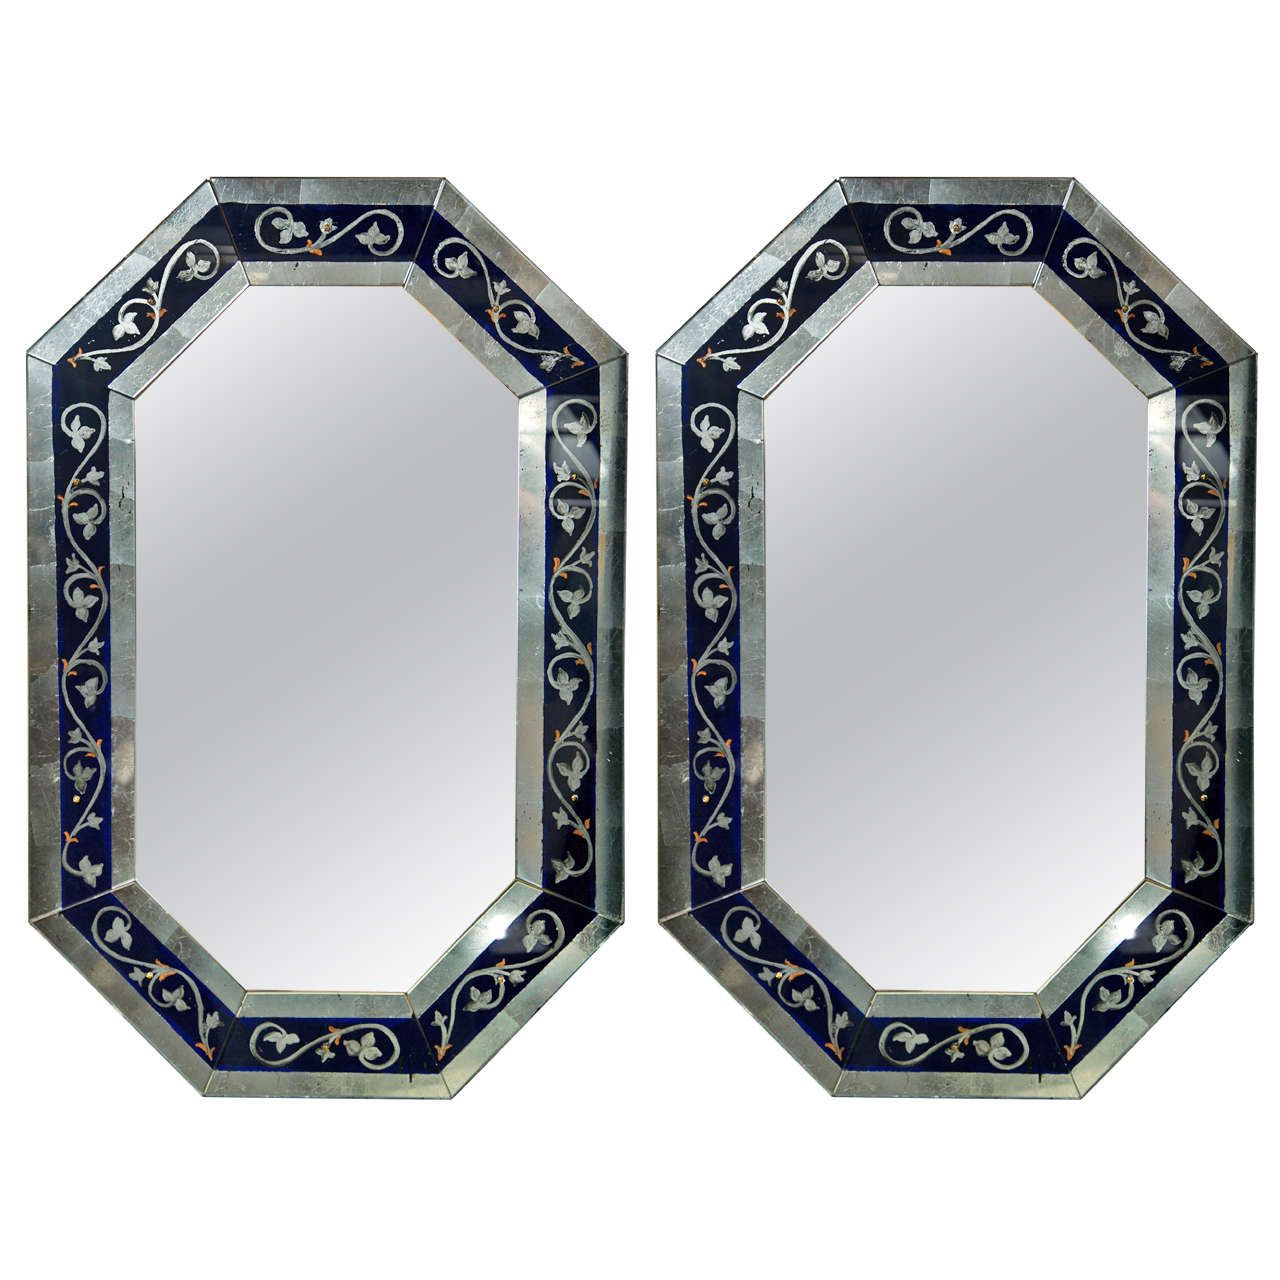 Pair Of Octagonal Silver Leaf Mirrors At 1stdibs In Metallic Gold Leaf Wall Mirrors (View 4 of 15)